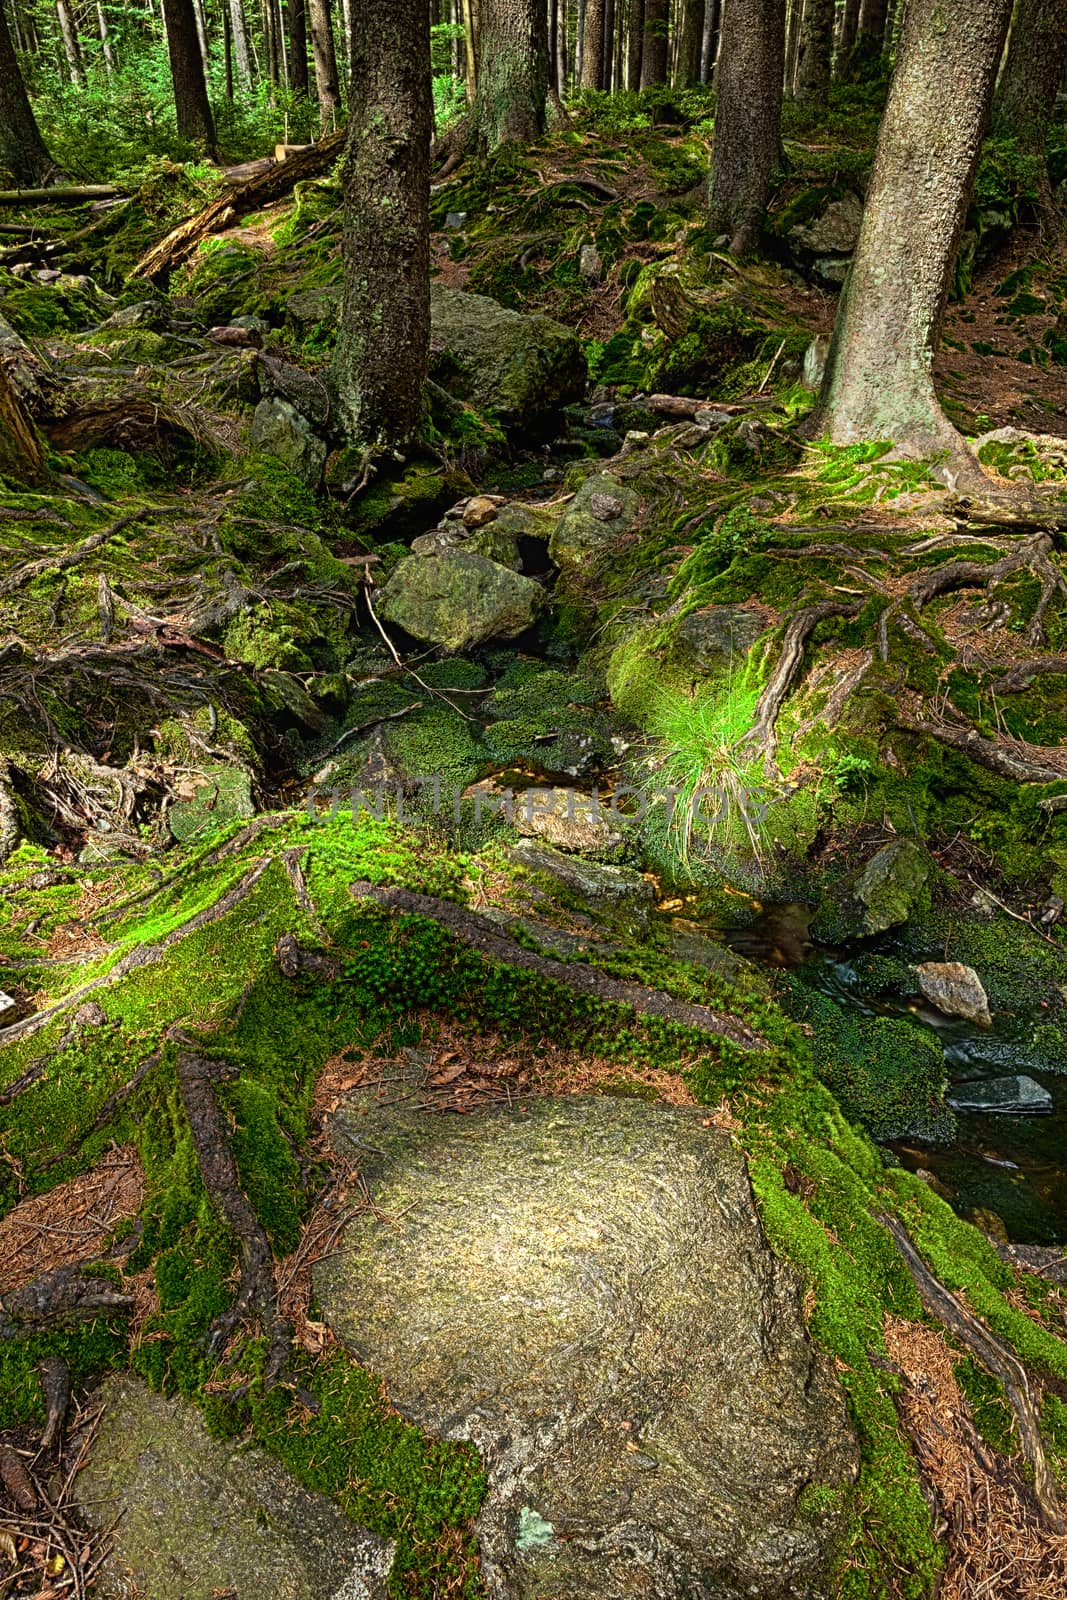 The primeval forest with the creek - HDR by hanusst